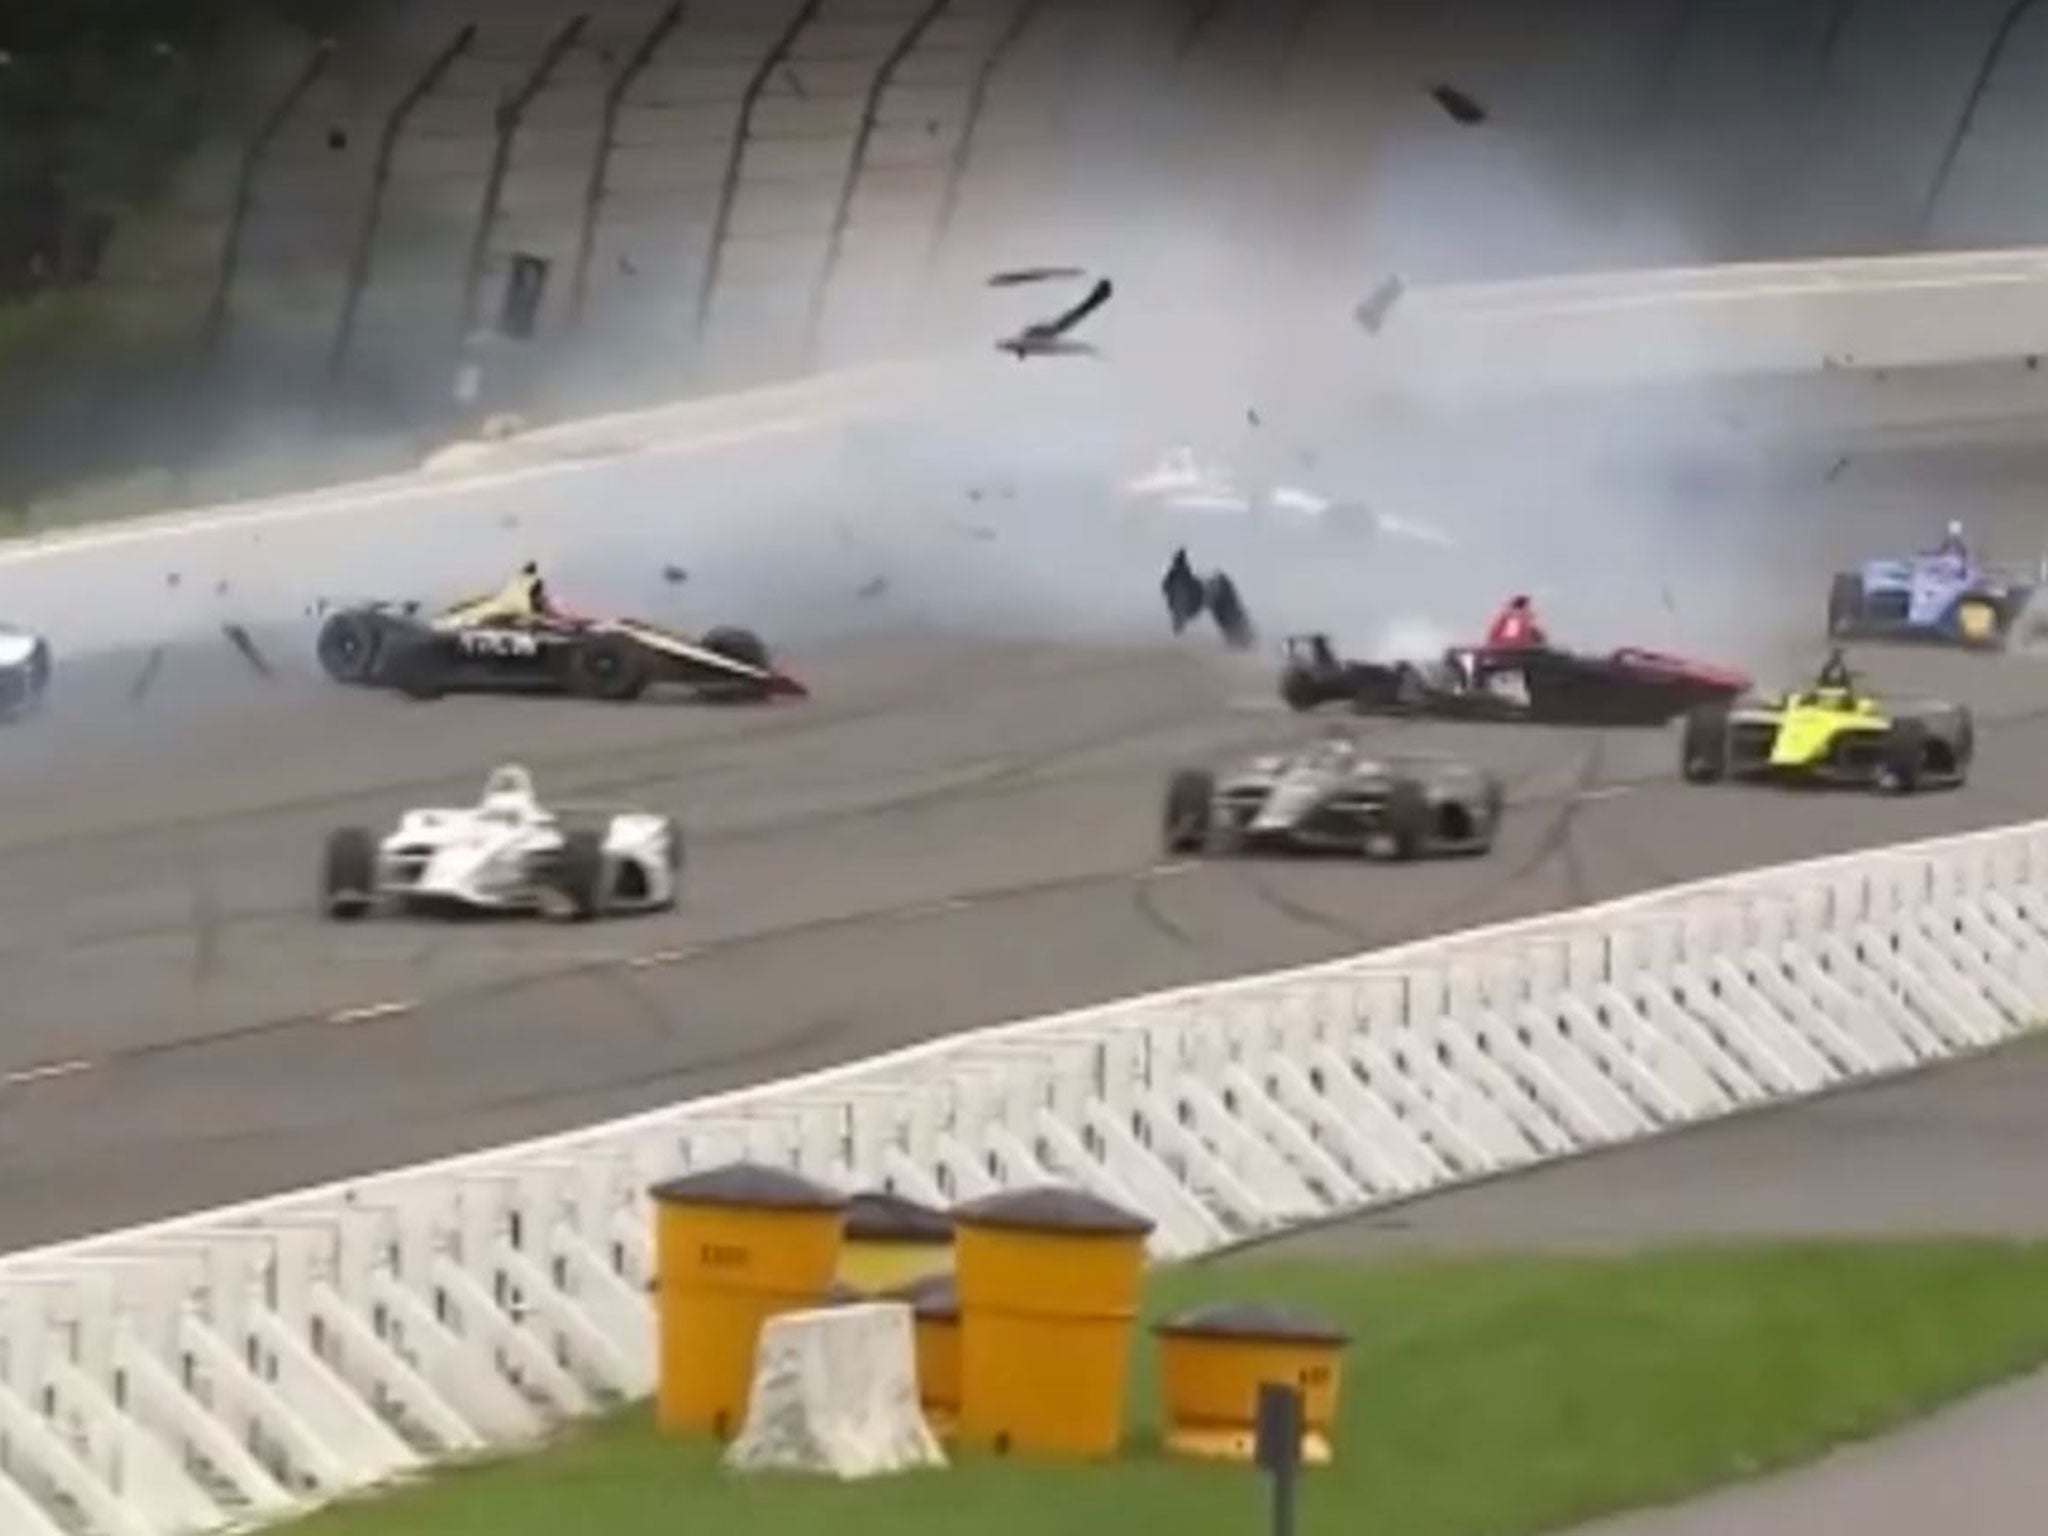 Wickns' car spun across the track into oncoming traffic